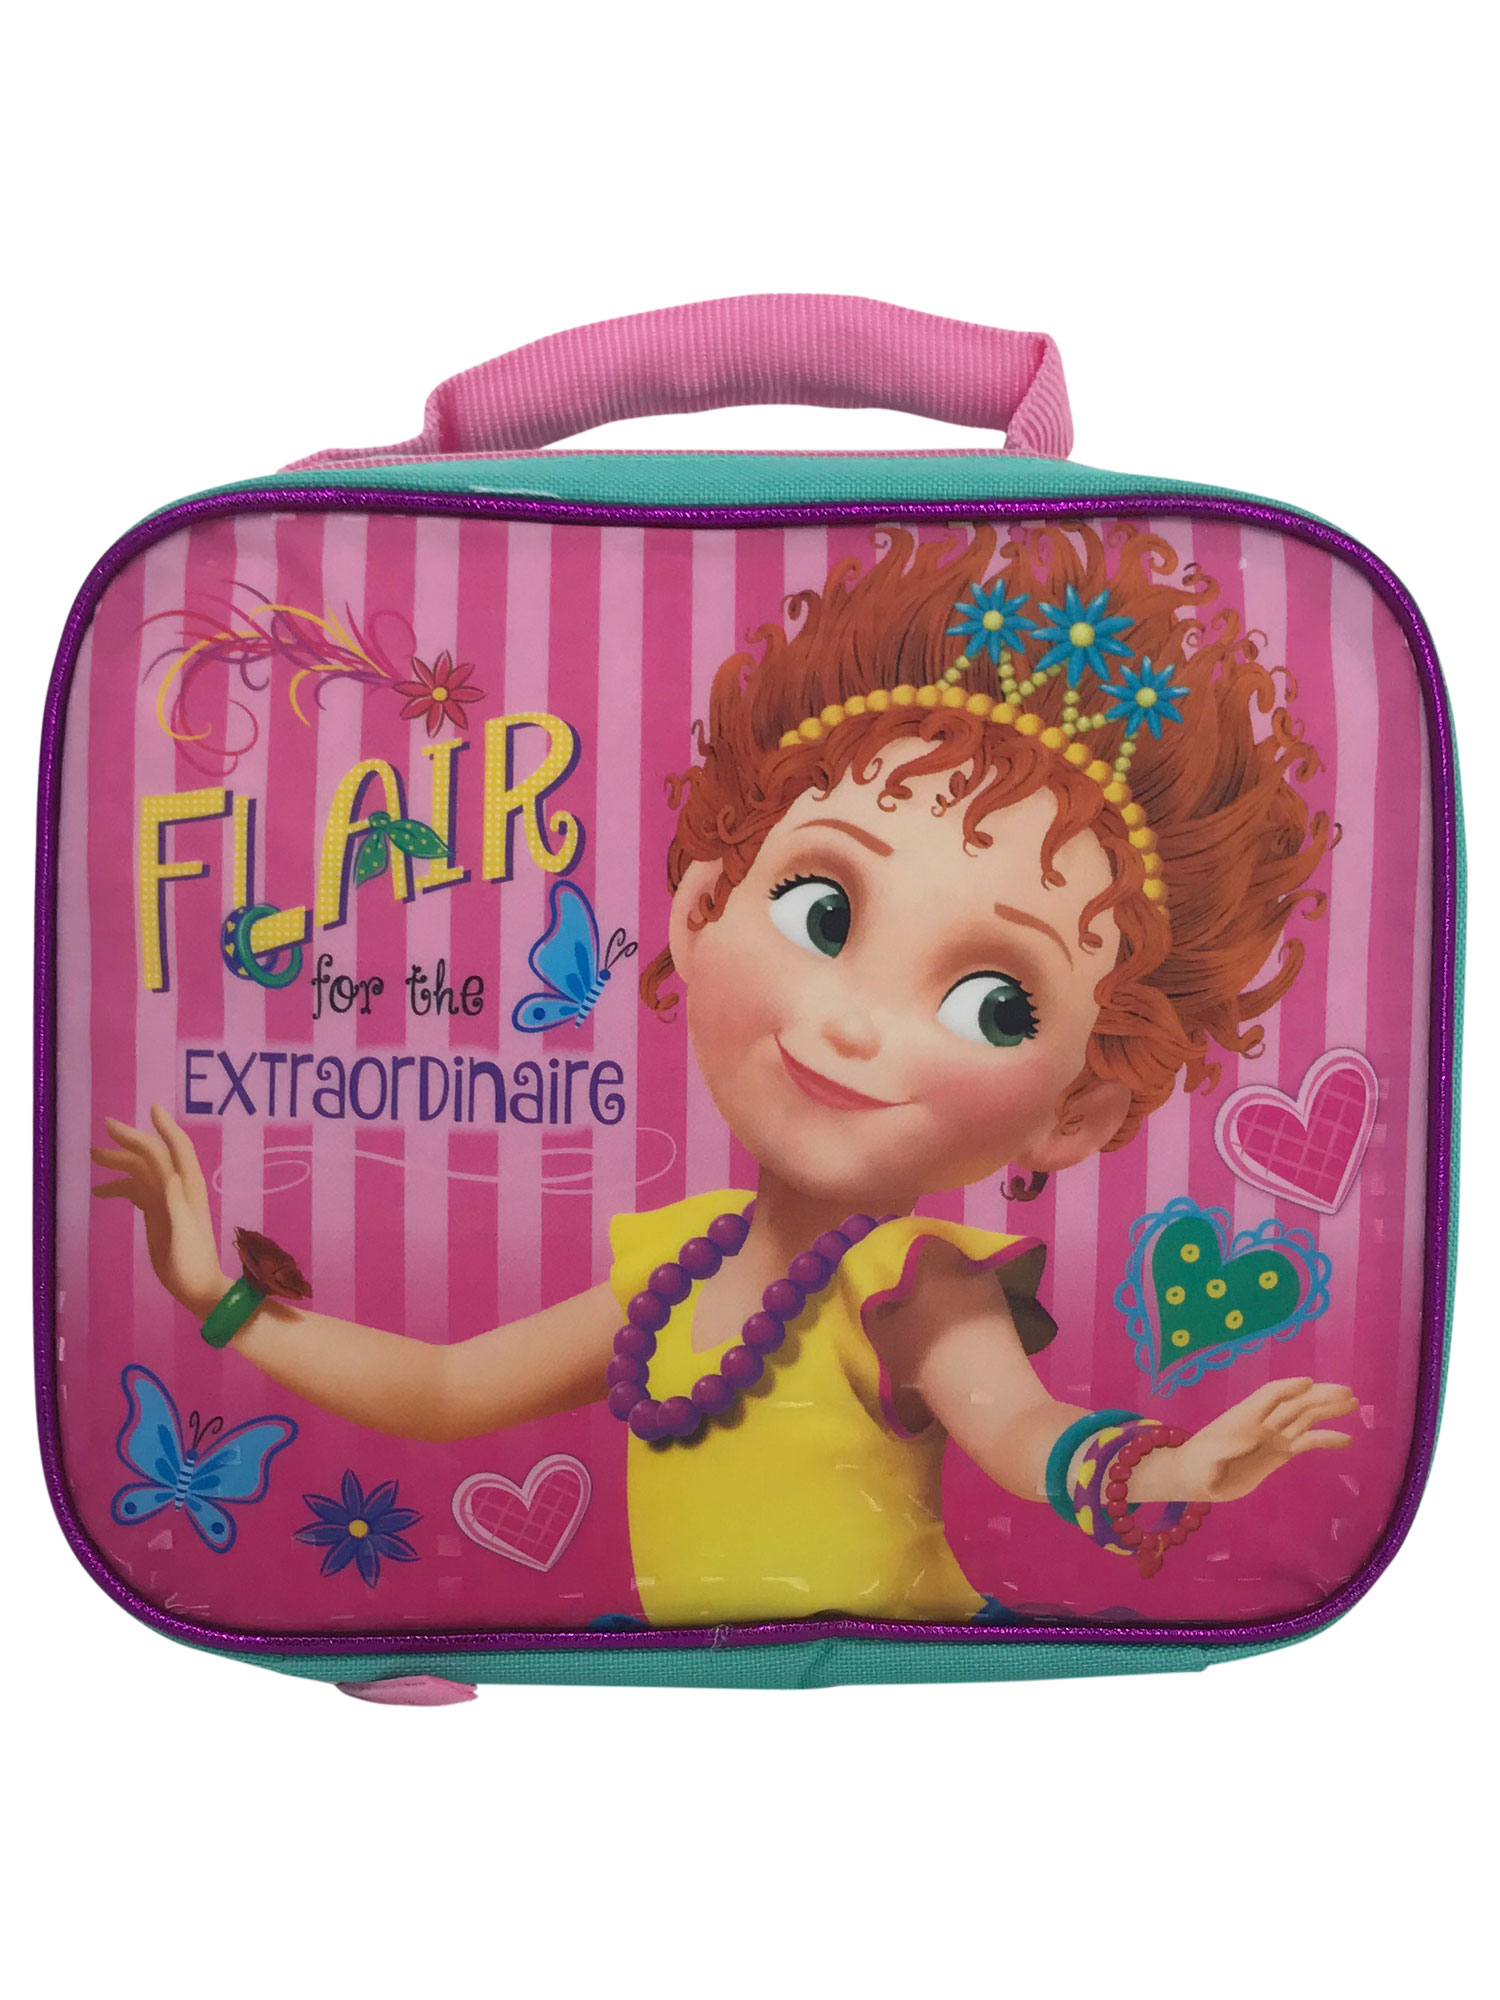 Girls Fancy Nancy Backpack 16" with Detachable Insulated Lunch Bag 2-Piece - image 4 of 6